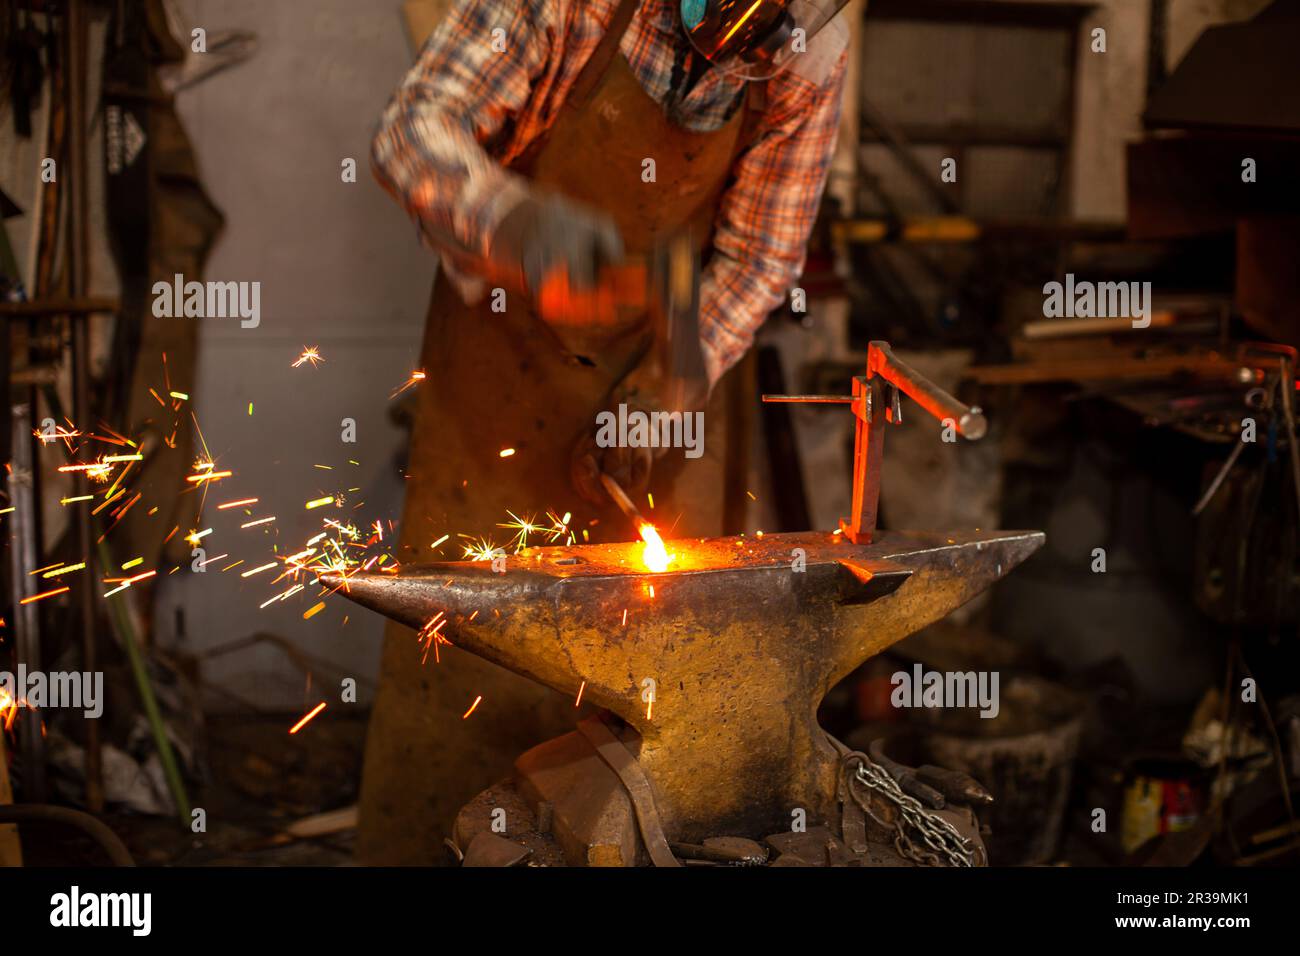 The blacksmith manually forging the molten metal on the anvil in smithy with spark fireworks. Stock Photo